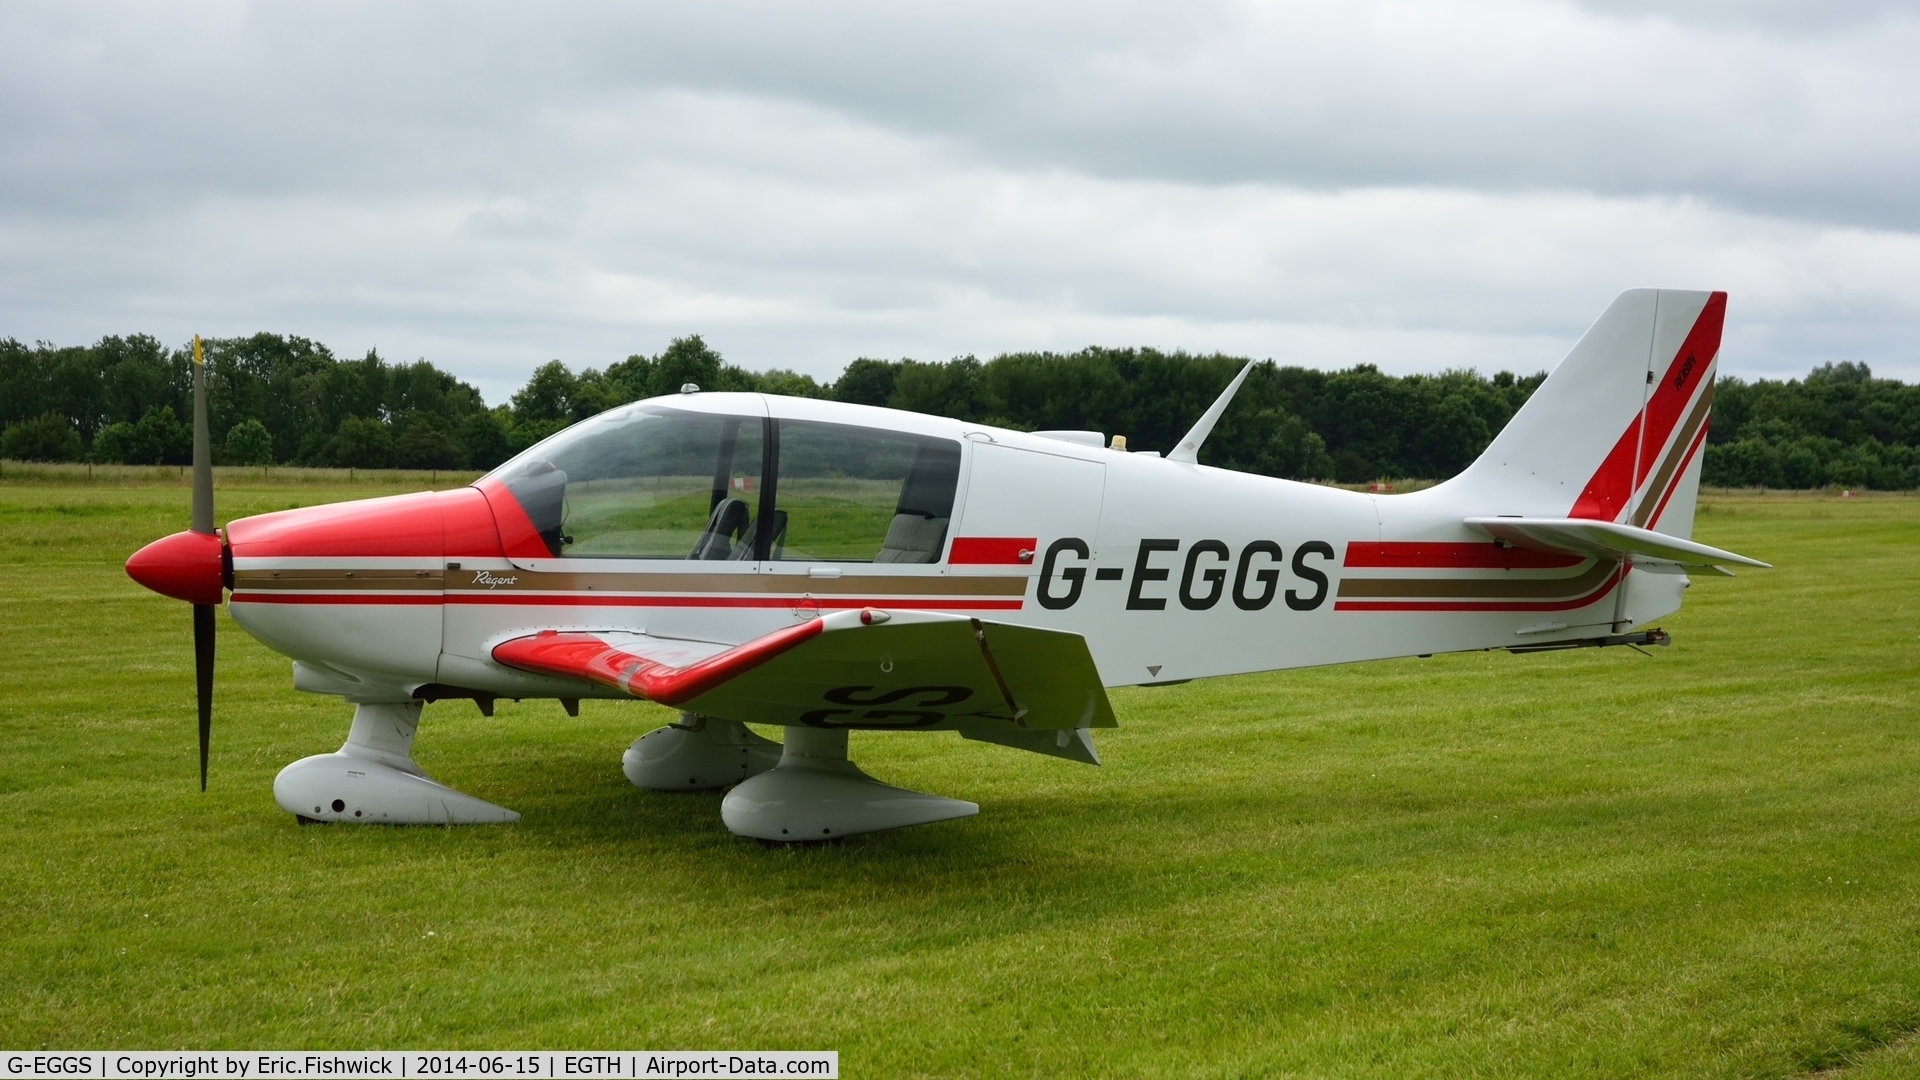 G-EGGS, 1979 Robin DR-400-180 Regent Regent C/N 1443, 1. G-EGGS at The Shuttleworth Collection Airshow - featuring LAA 'party in the park'